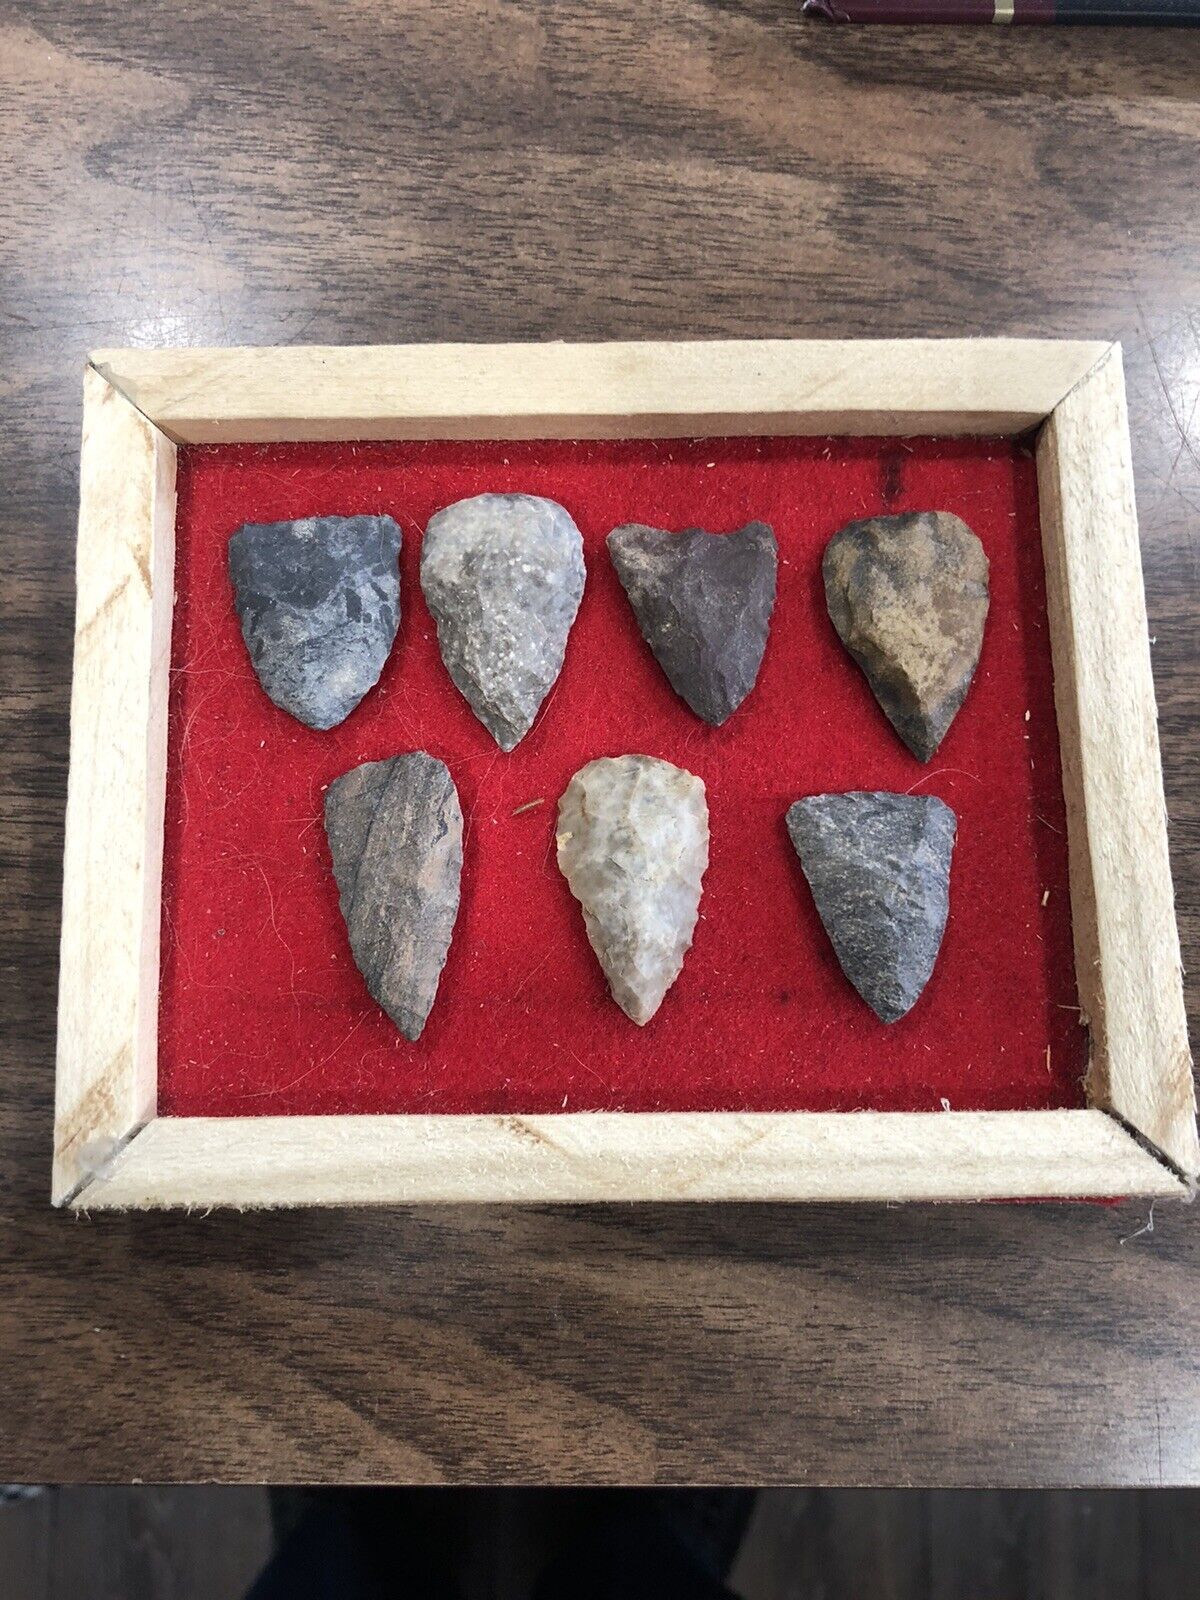 7 - Native American Arrow Heads Point On A Display